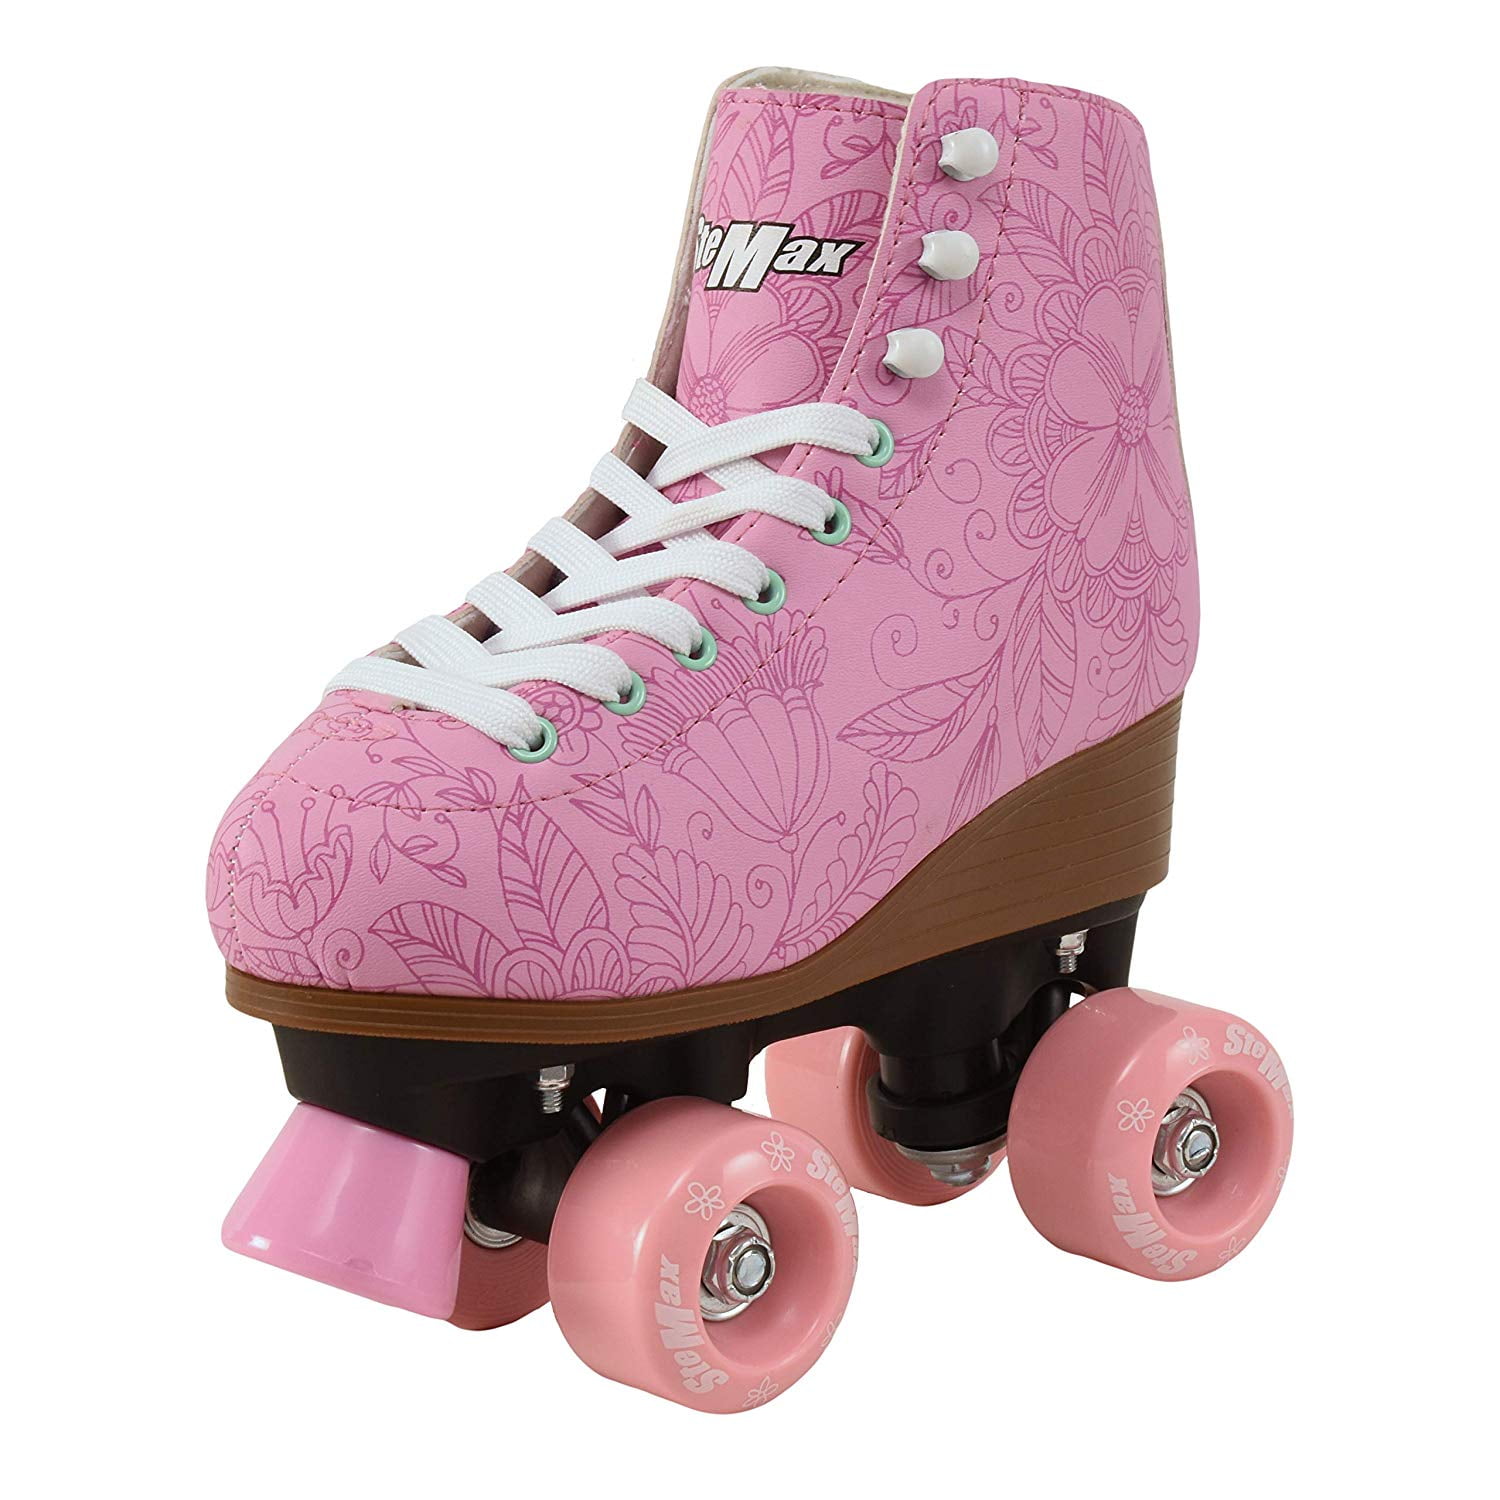 Quad Roller Skates for Girls and Women Size 8 Adult White and pink Heart Derby 